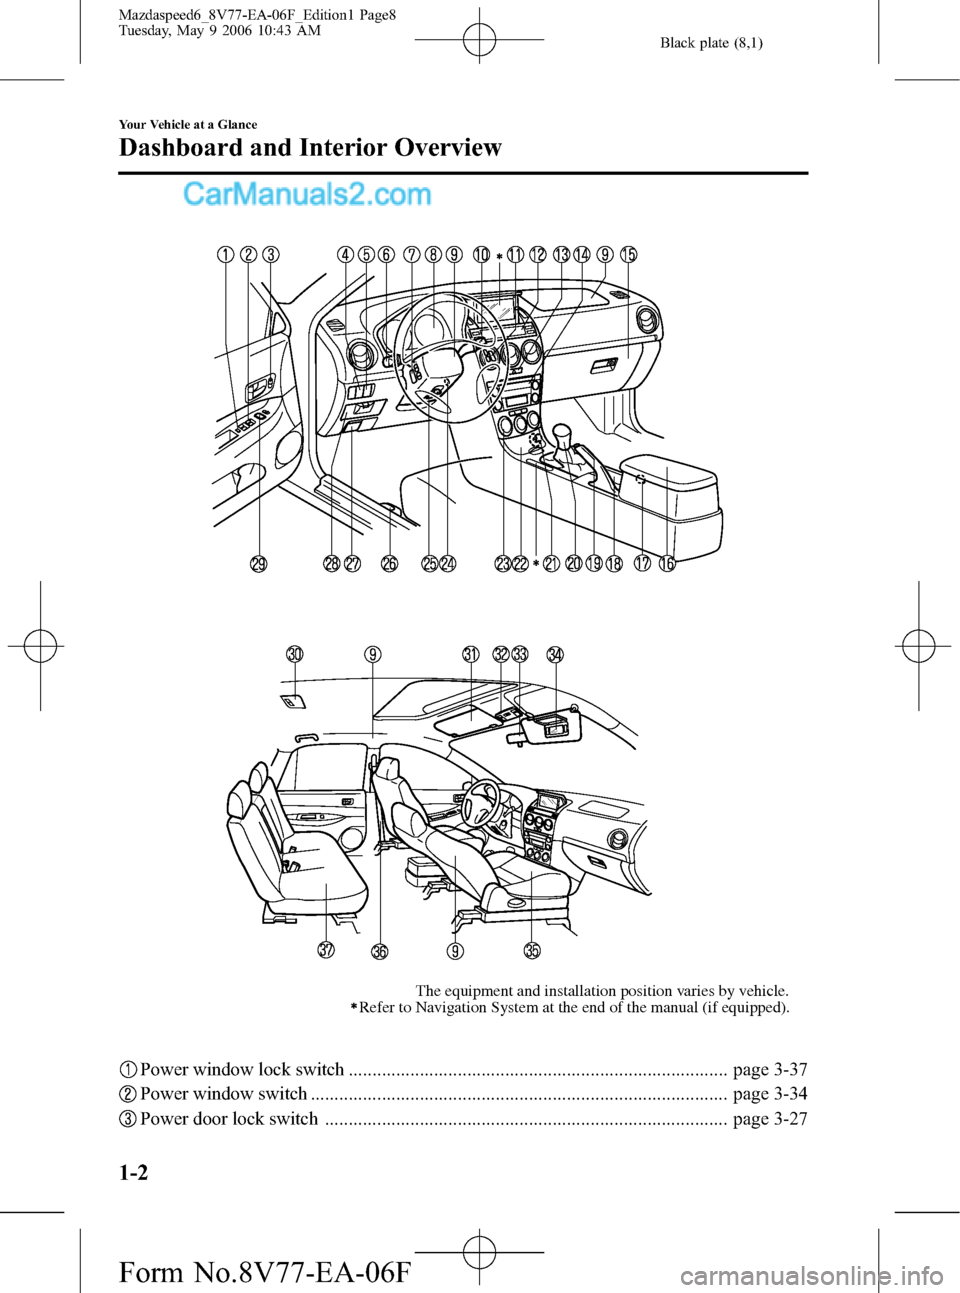 MAZDA MODEL MAZDASPEED 6 2007  Owners Manual (in English) Black plate (8,1)
The equipment and installation position varies by vehicle.
Refer to Navigation System at the end of the manual (if equipped).
Power window lock switch ...............................